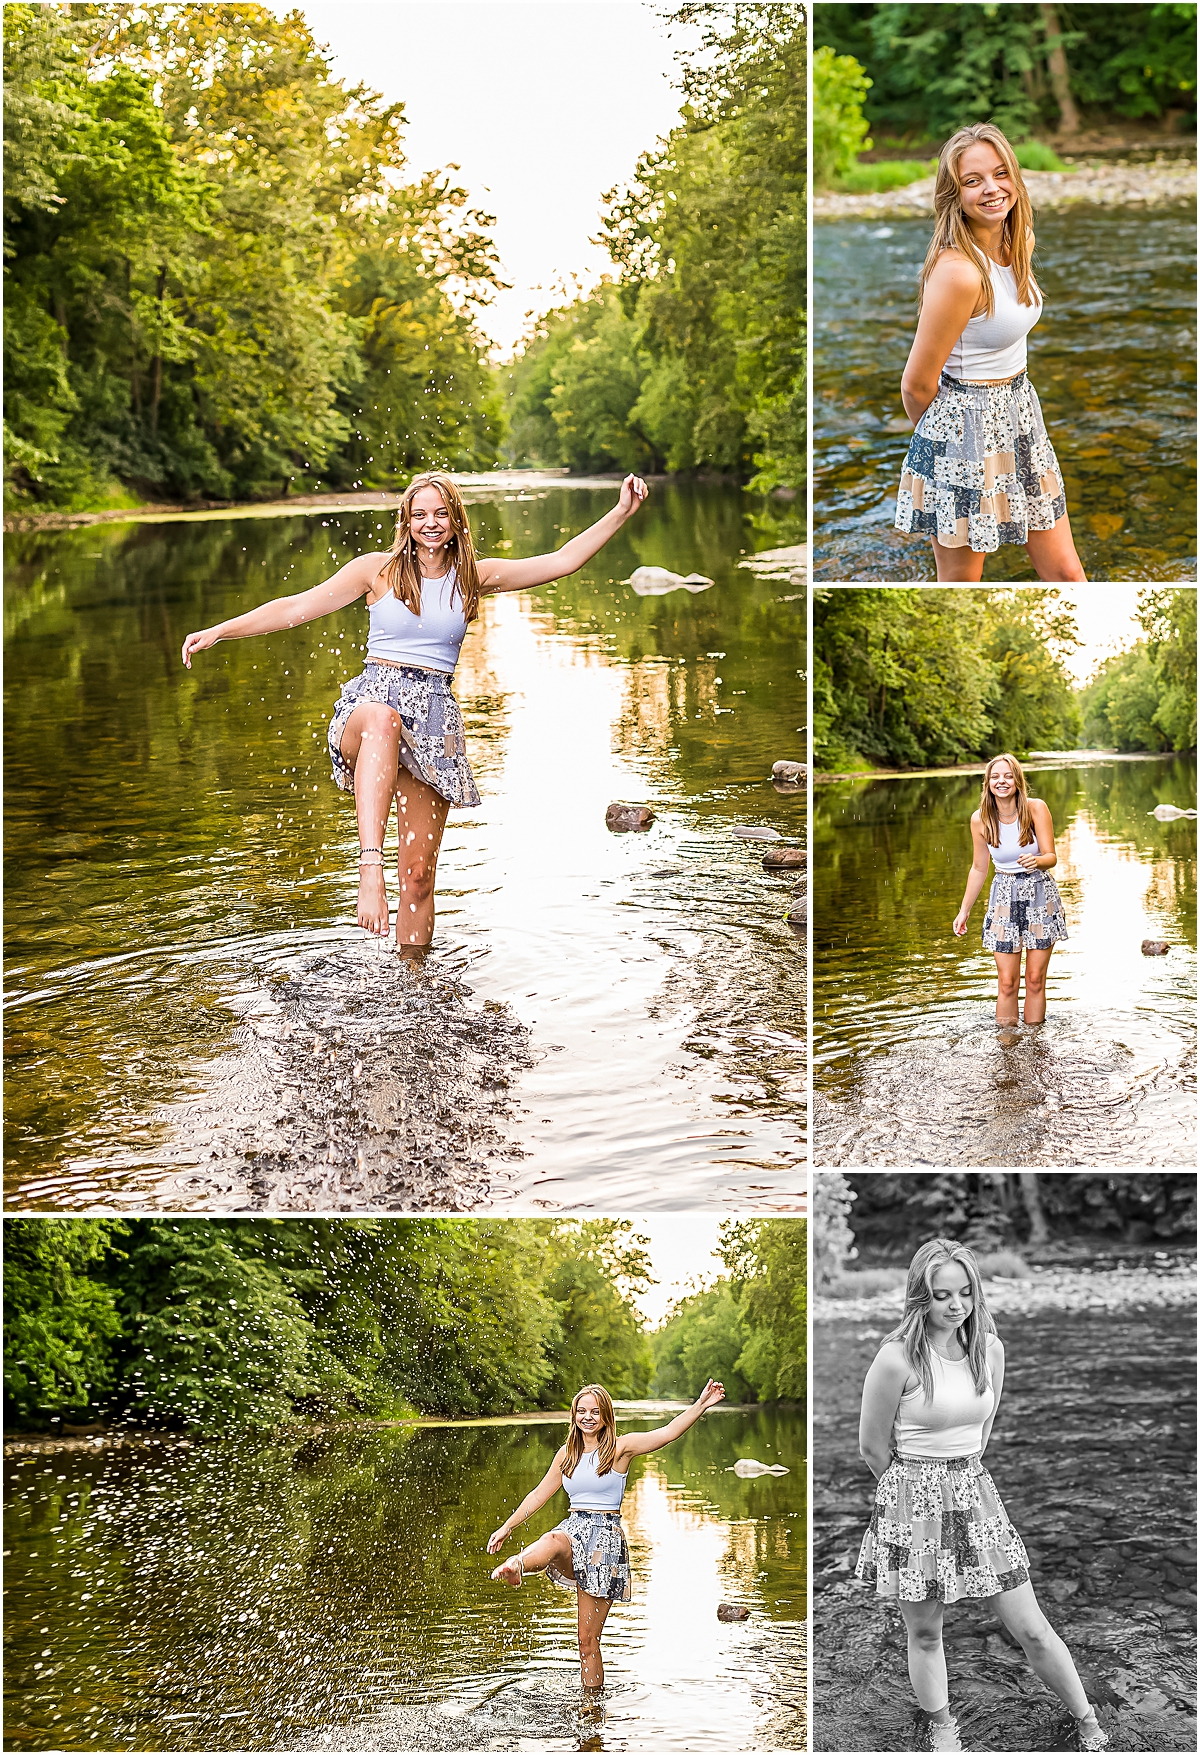 Brooke barefoot in a stream and kicking water  during Senior Photography session in Bridgewater VA